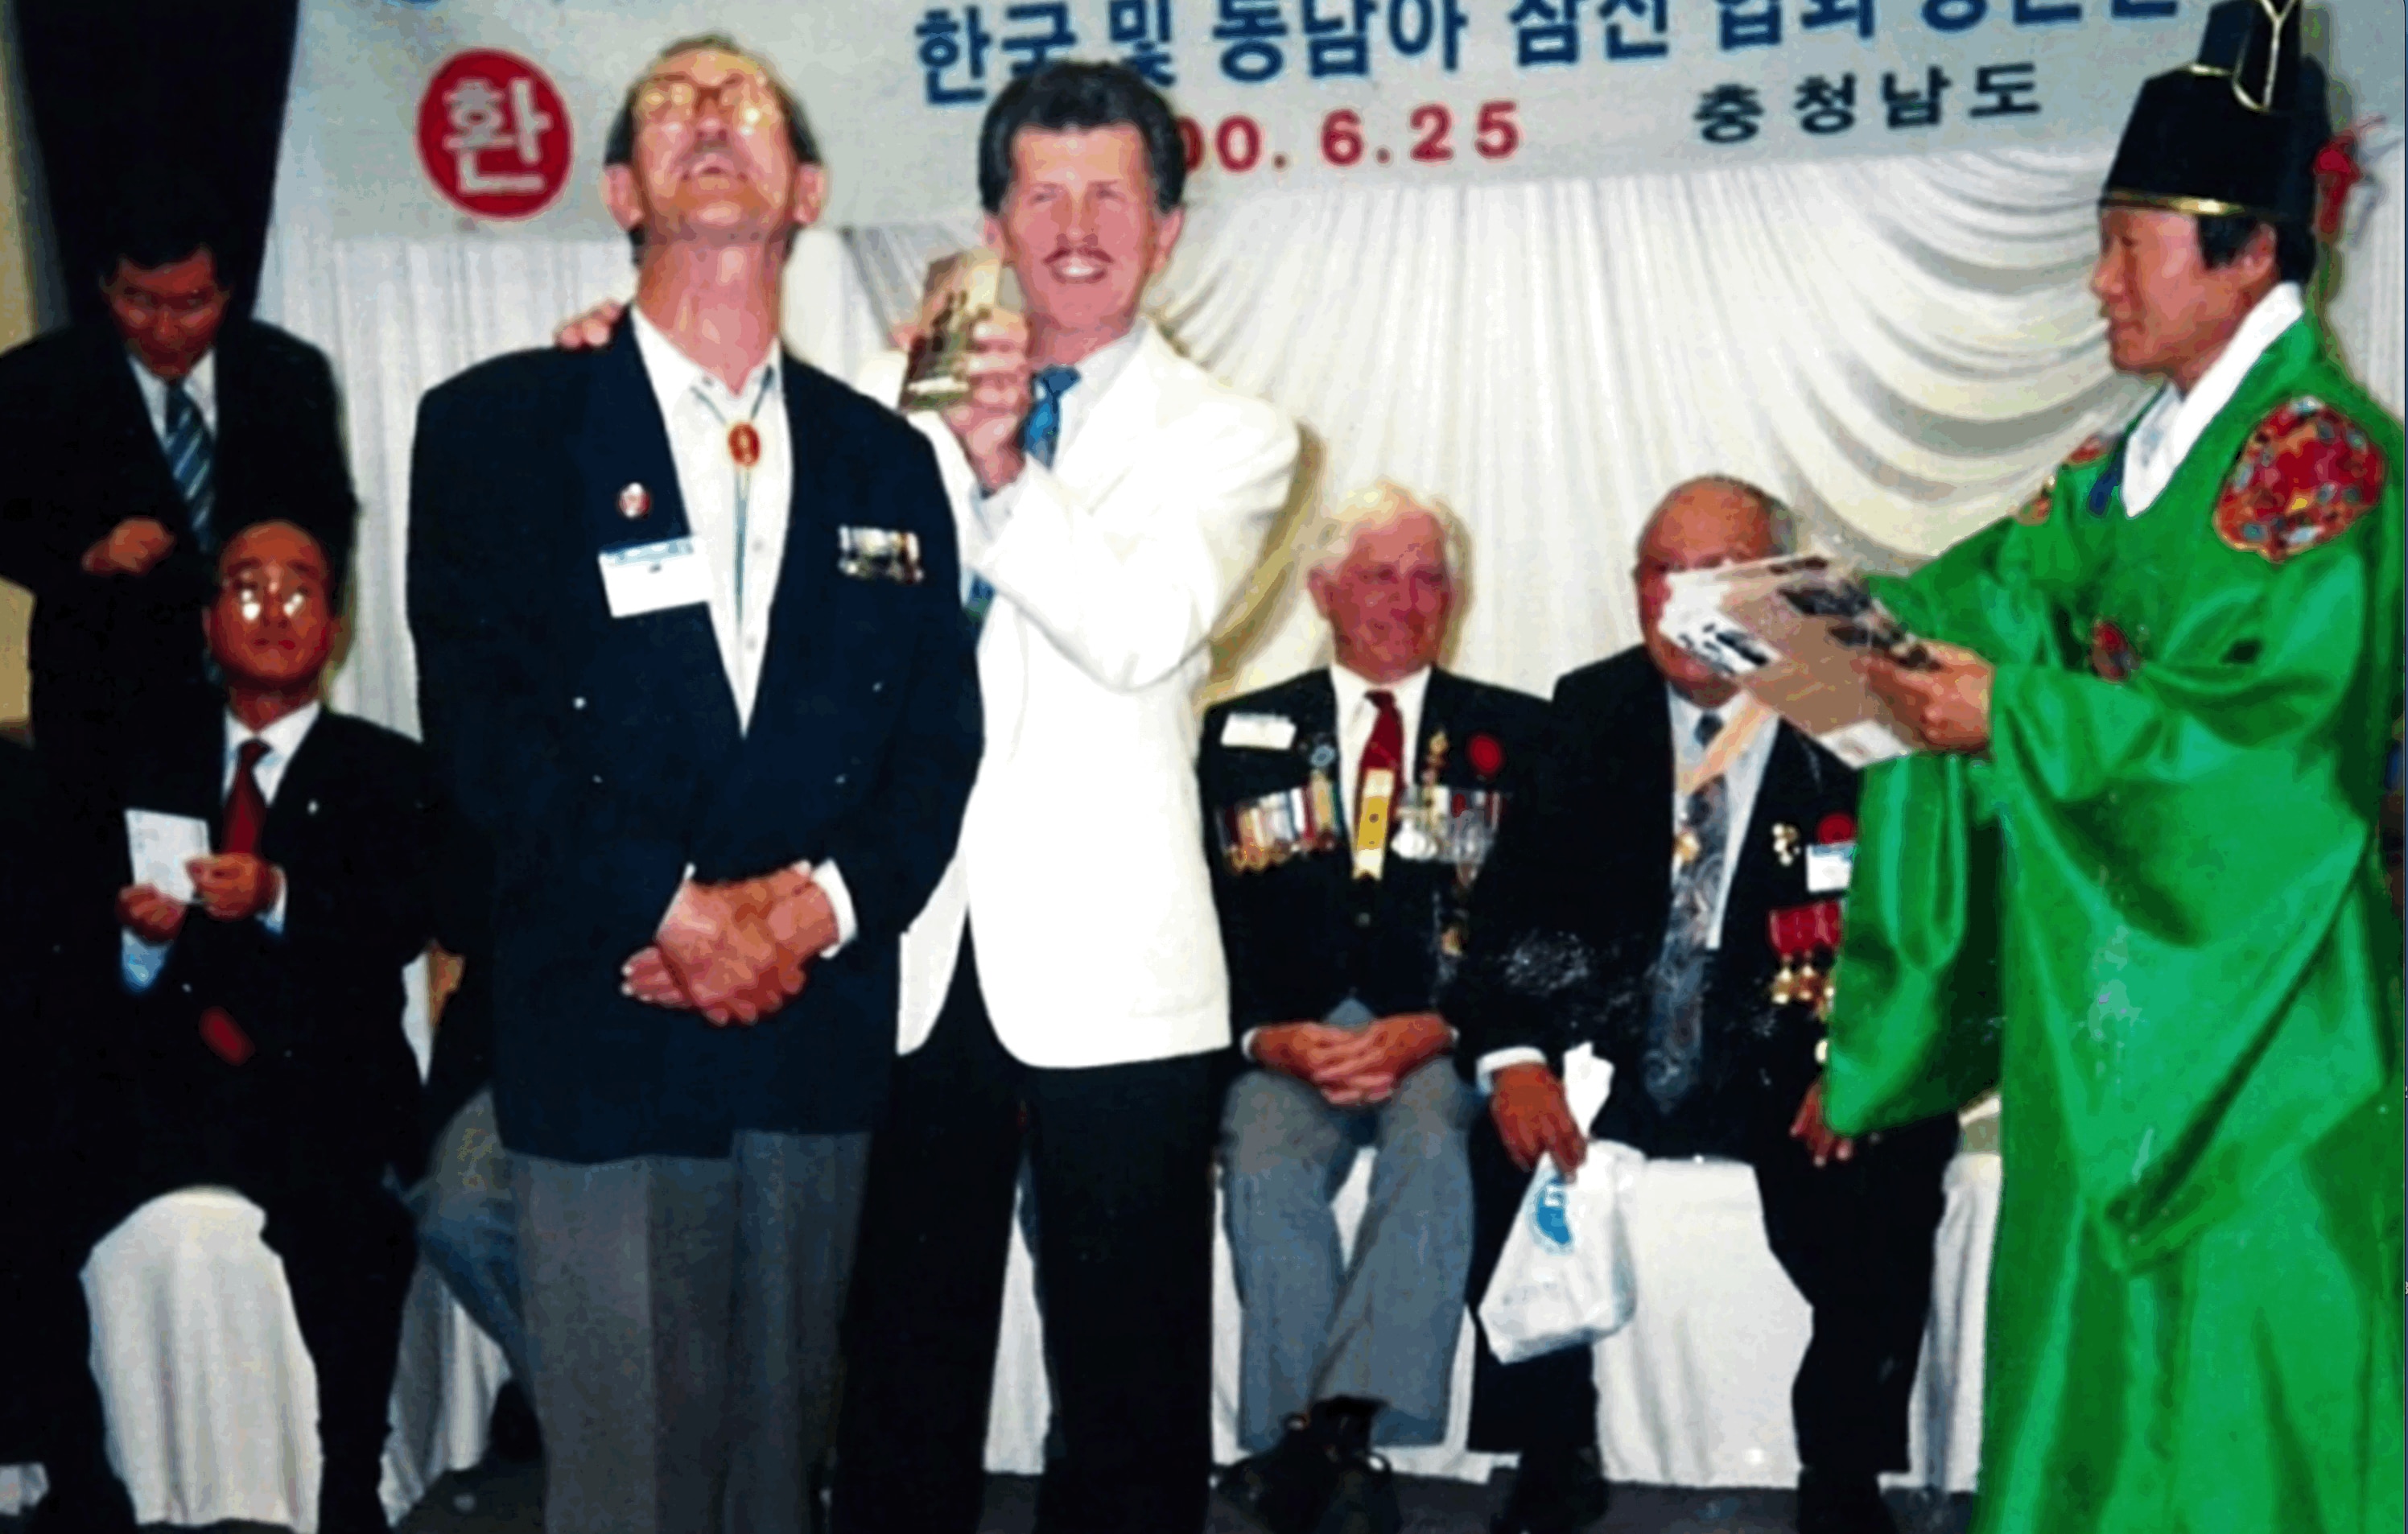 Korean War veterans Mr Ron Cashman and Mr Johny Bineham presented a photo during an invited trip to Korea in 2000.  